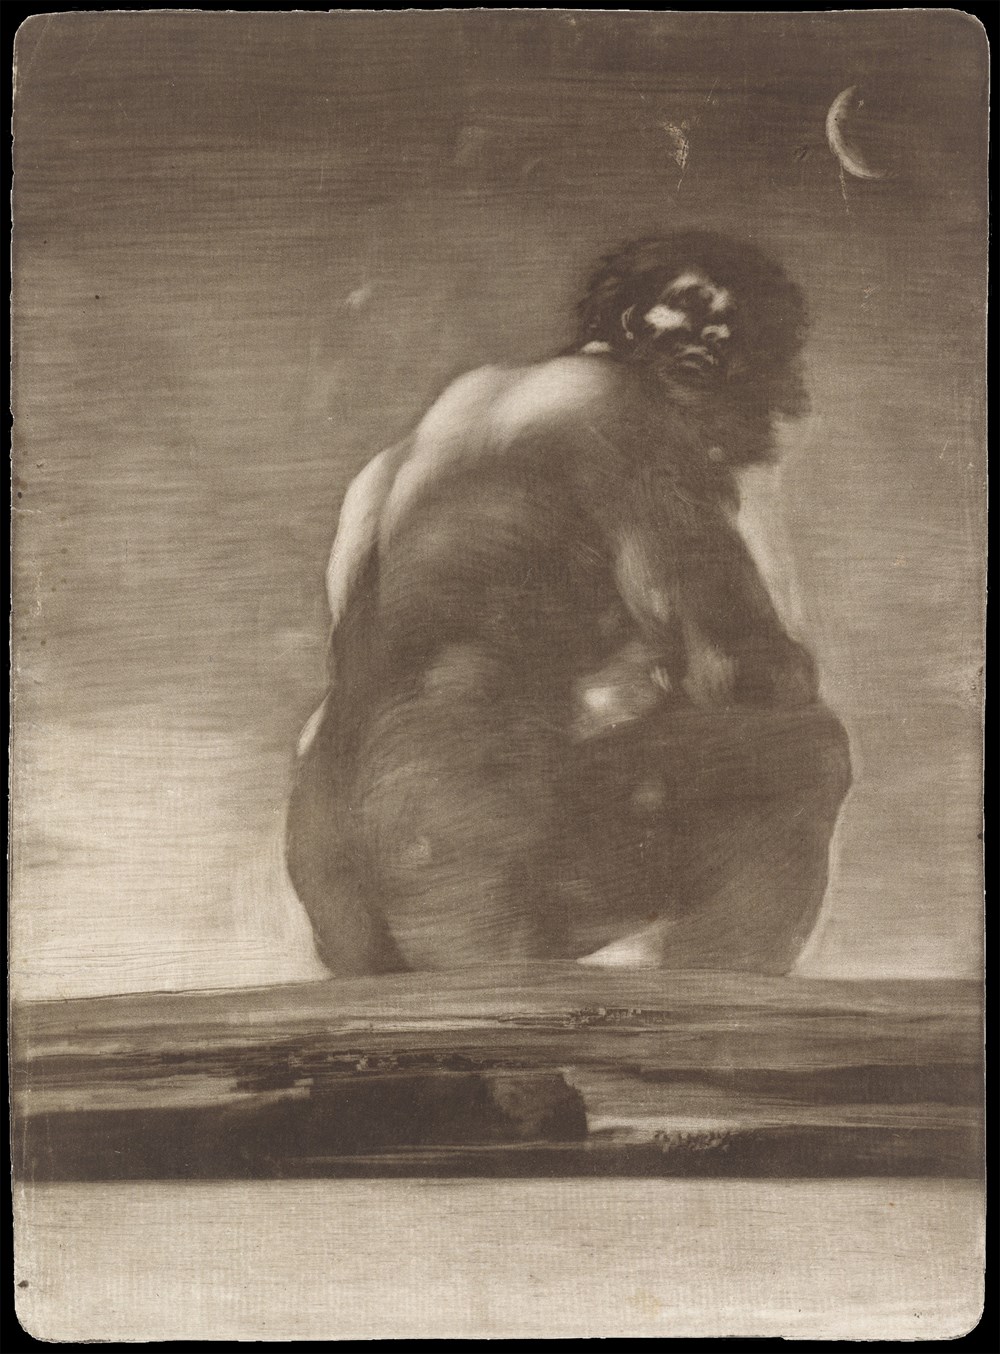 Francisco de Goya, Seated Giant, By 1818 (possibly 1814–18). Burnished aquatint, scraper, roulette, lavis. The Metropolitan Museum of Art, New York 